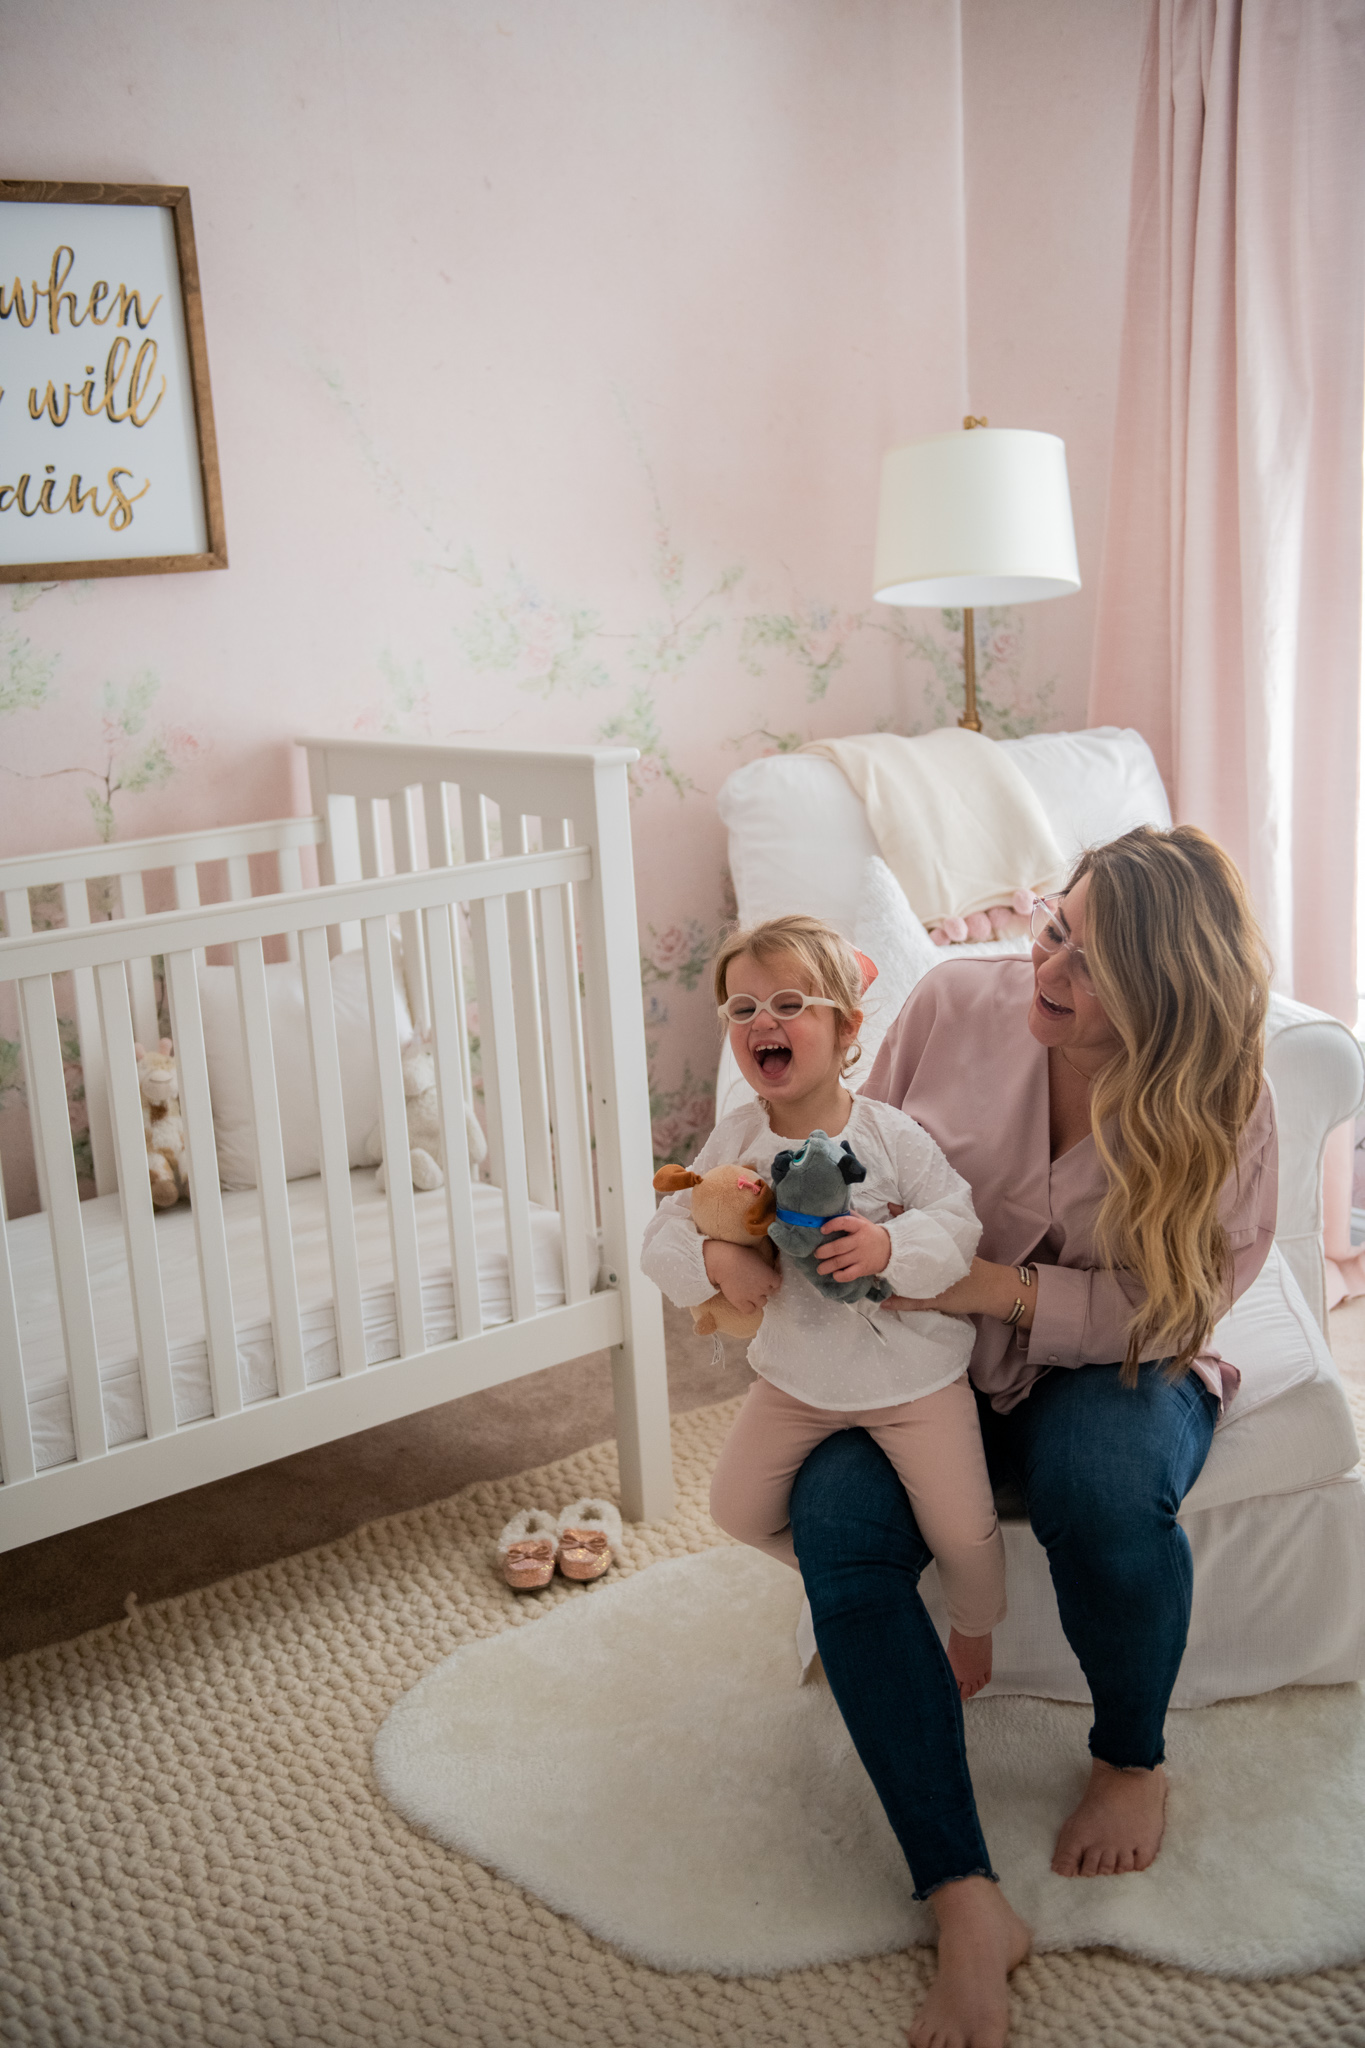 Floral Nursery by popular Ohio life and style blog, Coffee Beans and Bobby Pins: image of a nursery with Anewall Sweet Laurel Mural wallpaper, white armchair, white bookcase, gold name sign, gold wishbone decor, pink curtains and white crib.